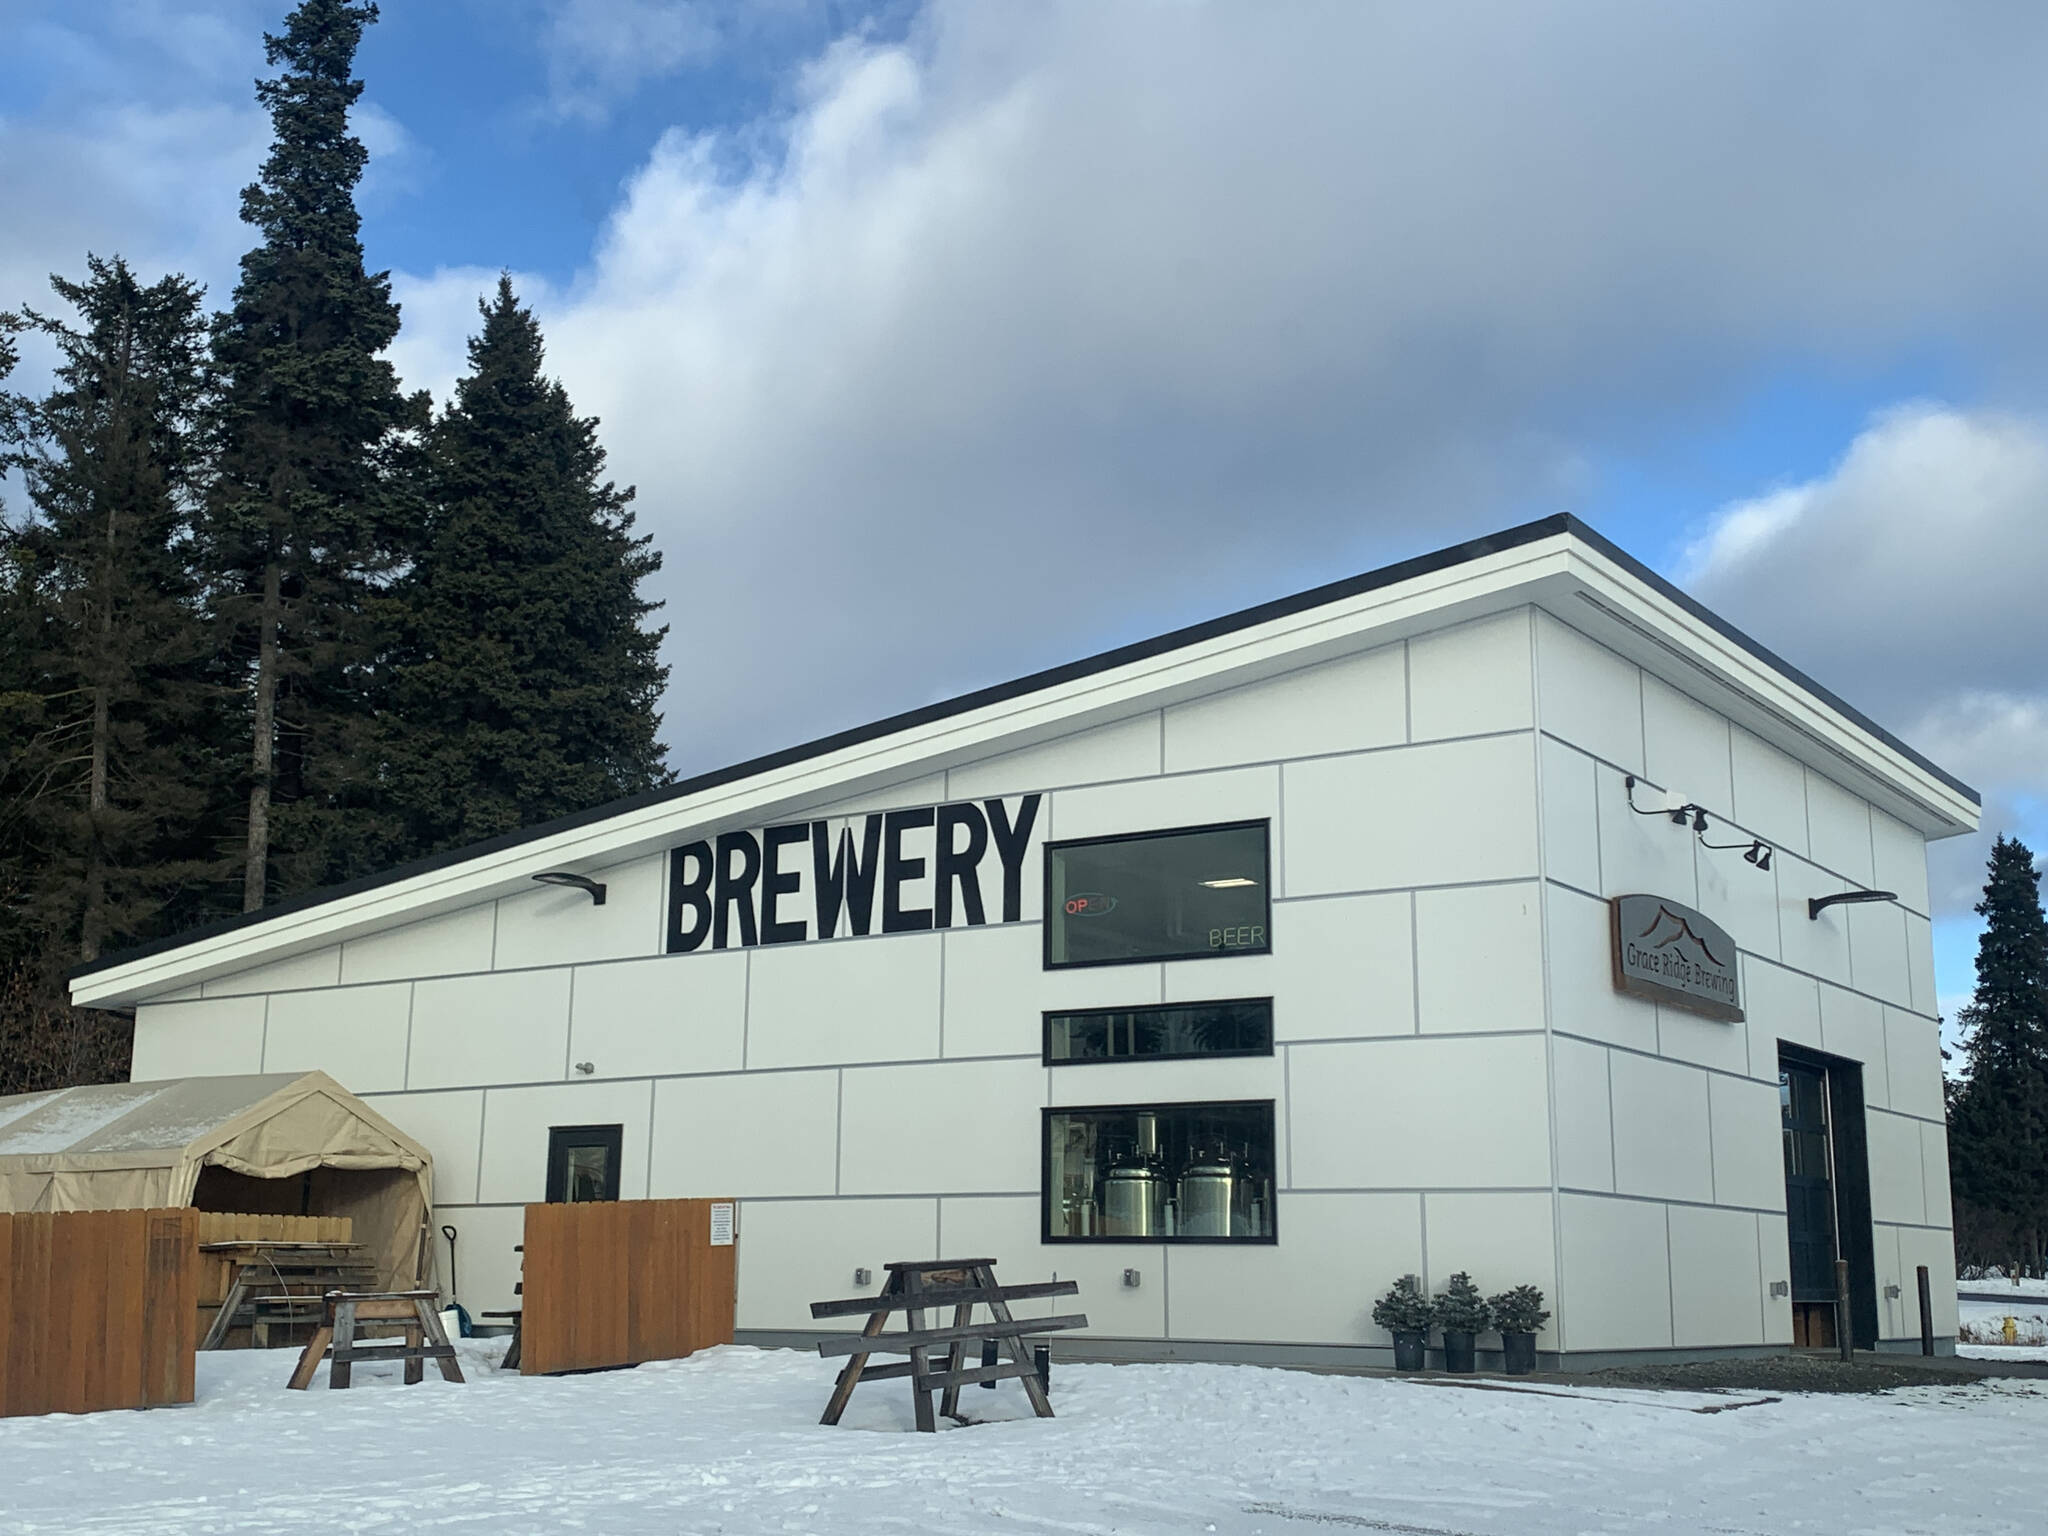 Grace Ridge Brewery celebrates one year in their new building on Smoky Bay Way, photographed Friday, Feb 3, 2023, in Homer, Alaska. (Photo by Christina Whiting/Homer News)